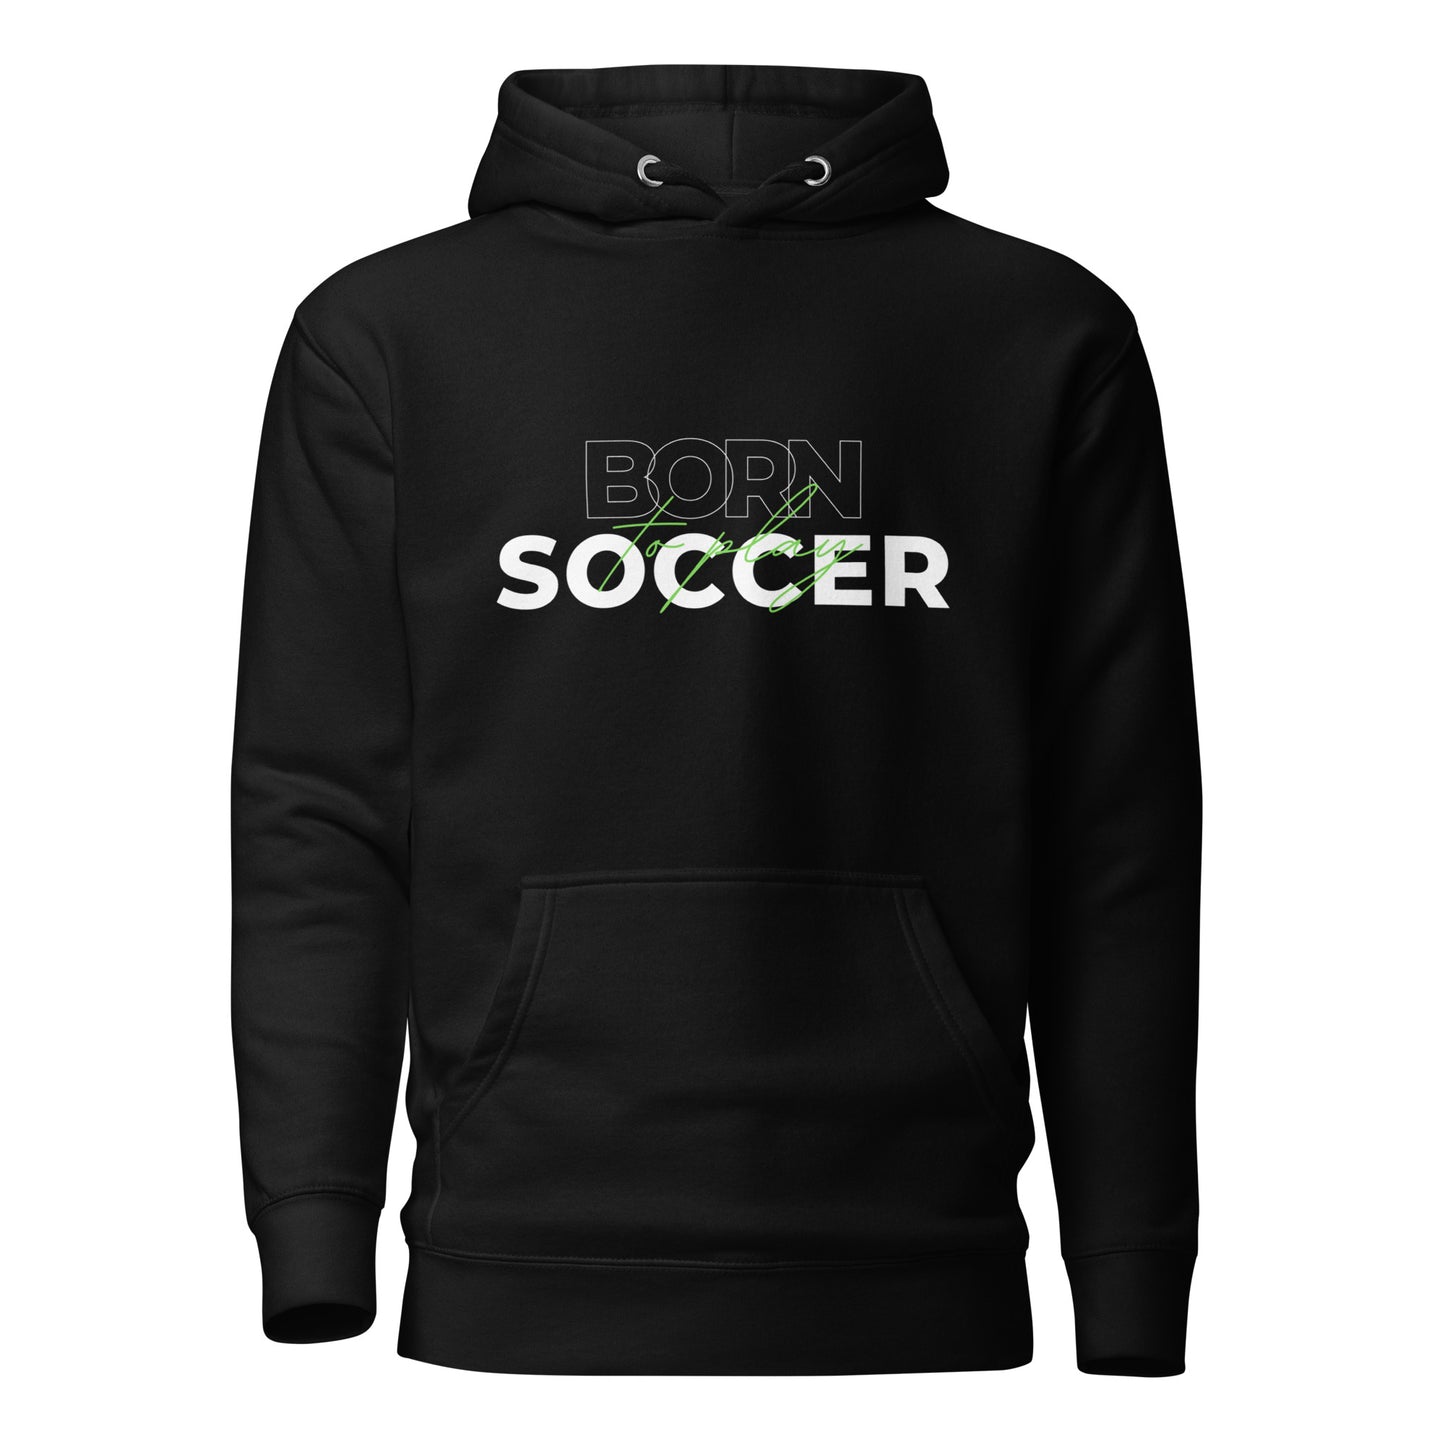 Born to Play Soccer Hoodie